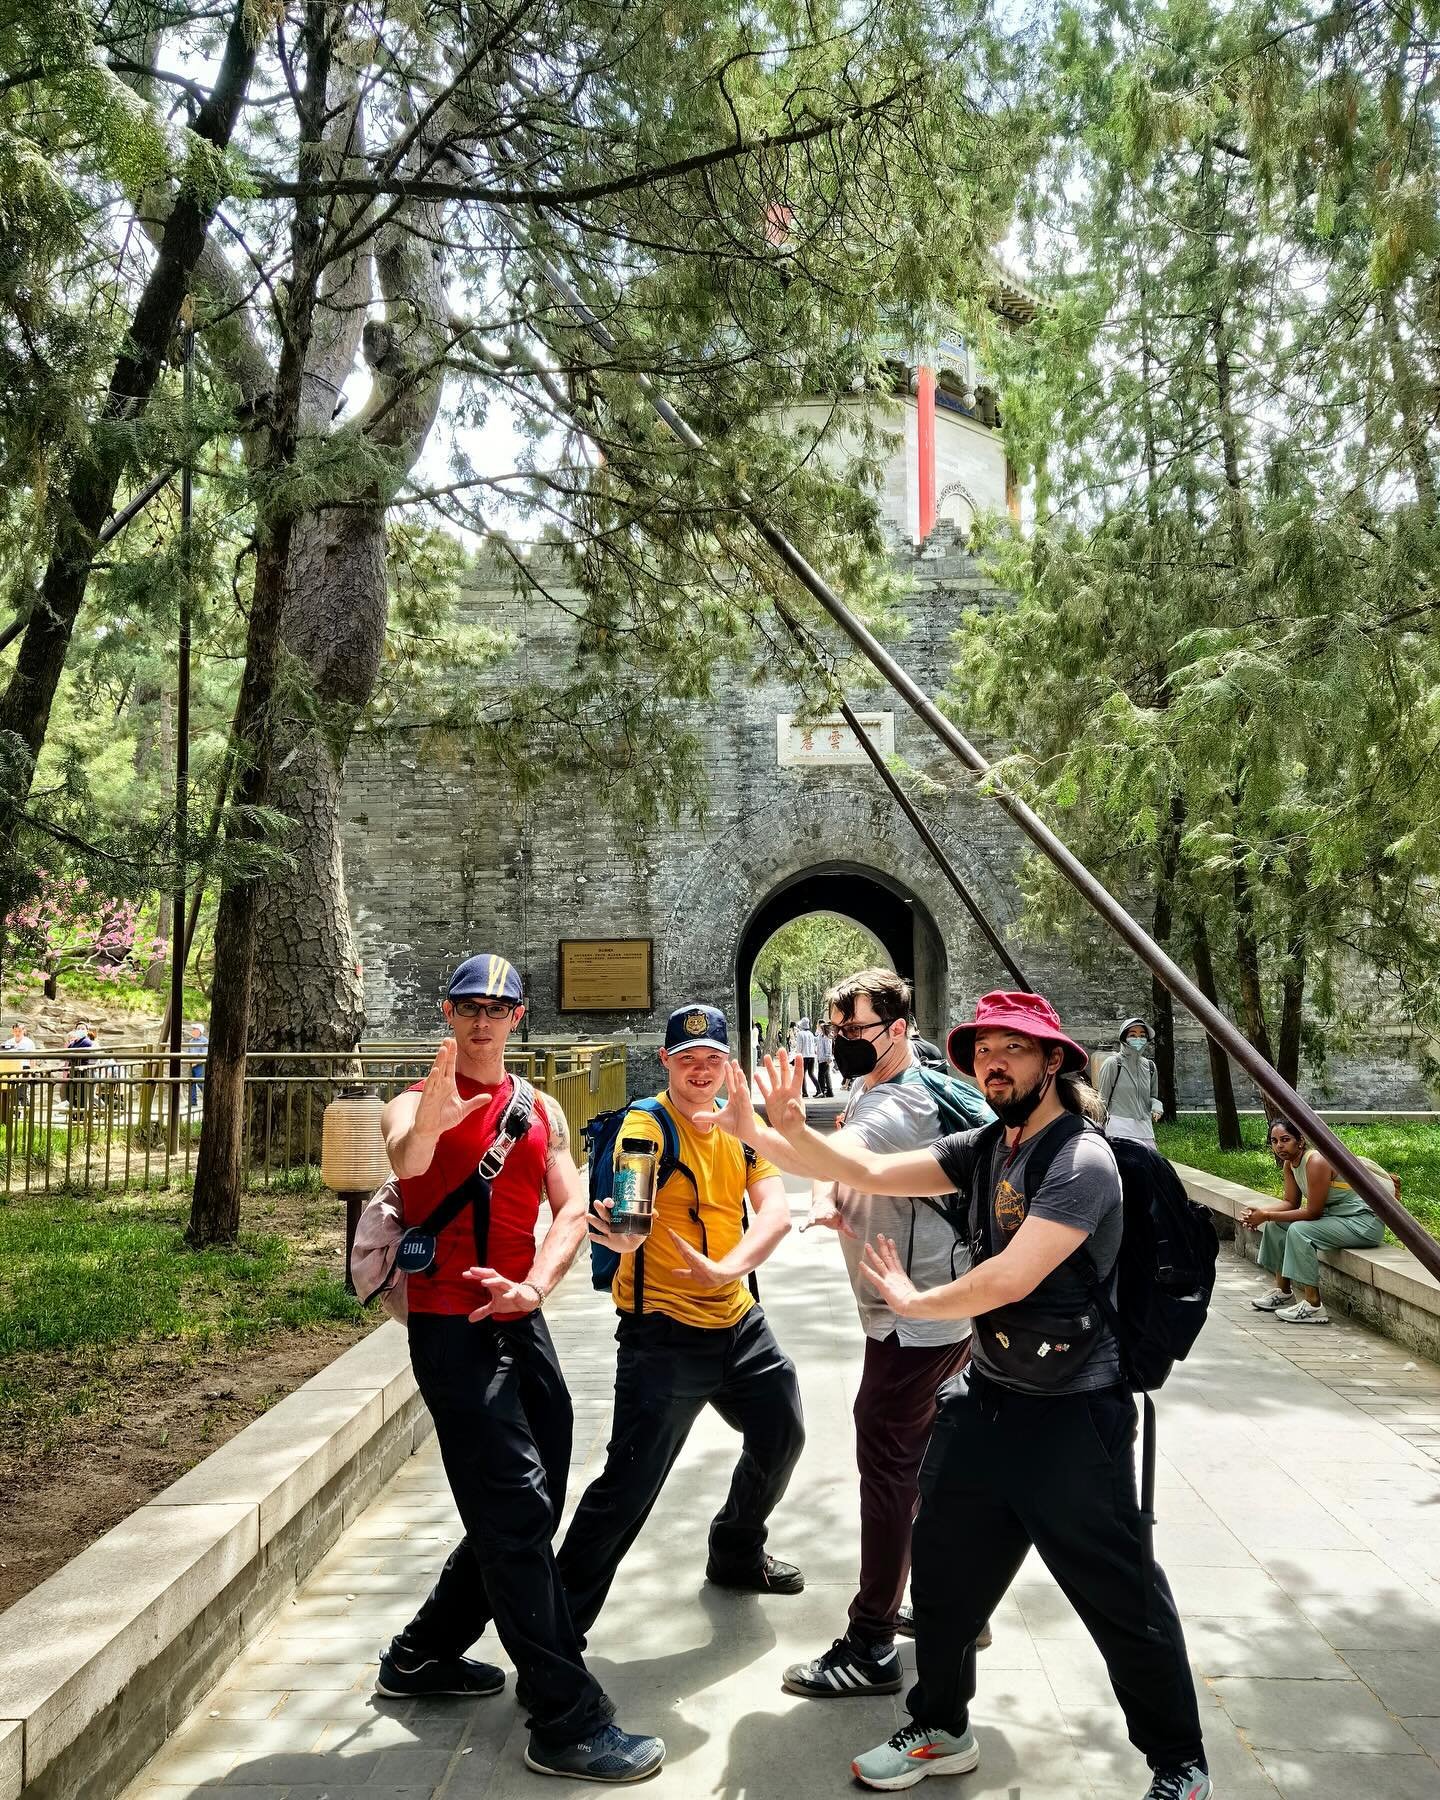 Some folks from Flying Tortoise hanging out at the Summer Palace representing three generations of Baguazhang and two family&rsquo;s. Chris Lum, 6th generation Liang under Zhang Xuean. Joey Haber, 7th generation Cheng under Ni Rouhua. Milo Albright, 